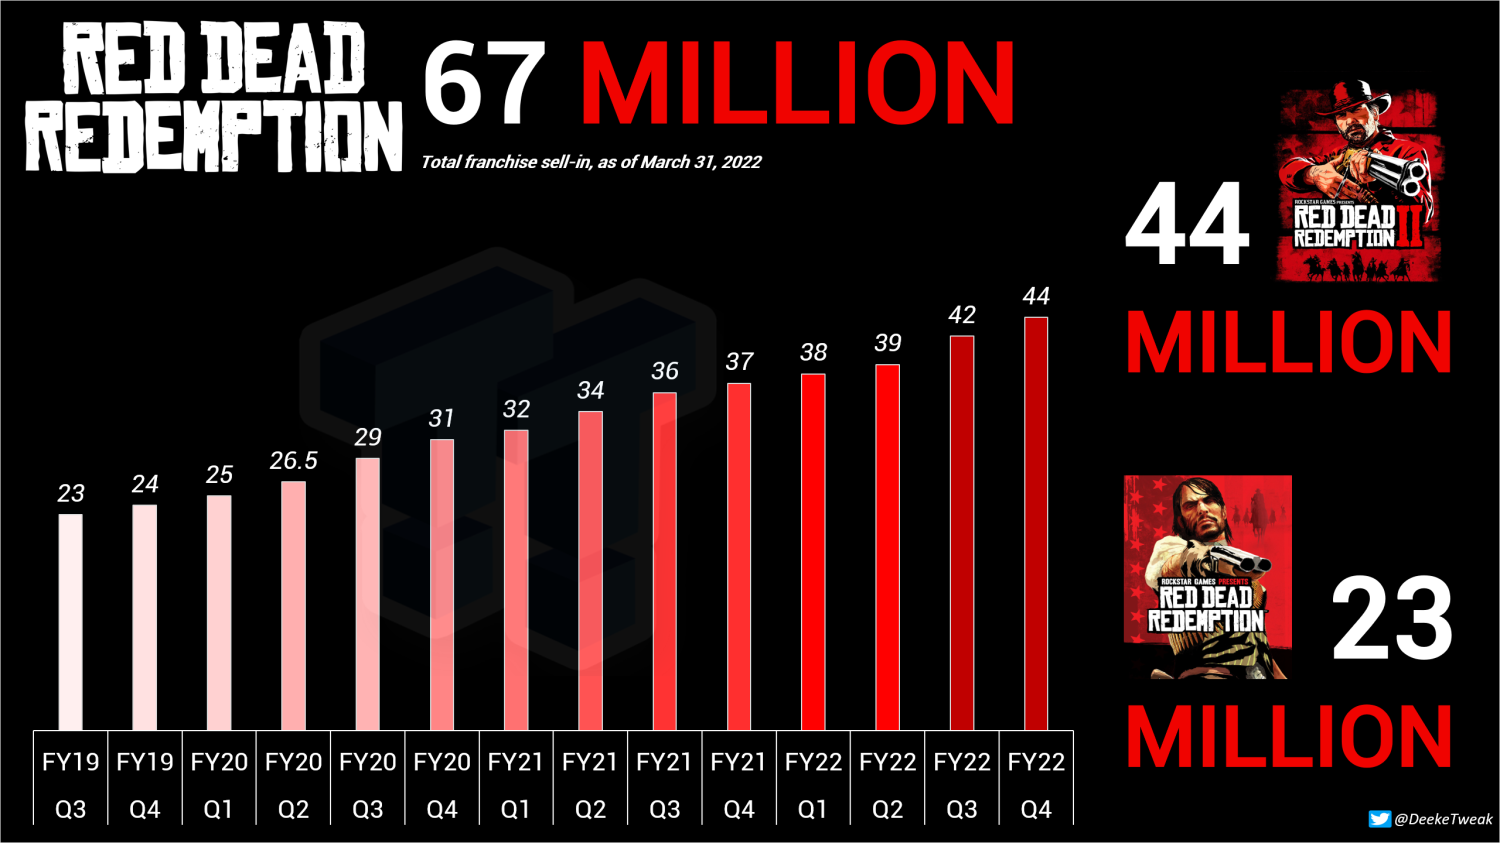 Red Dead Redemption 2 hits 44 million sales, surprises Take-Two